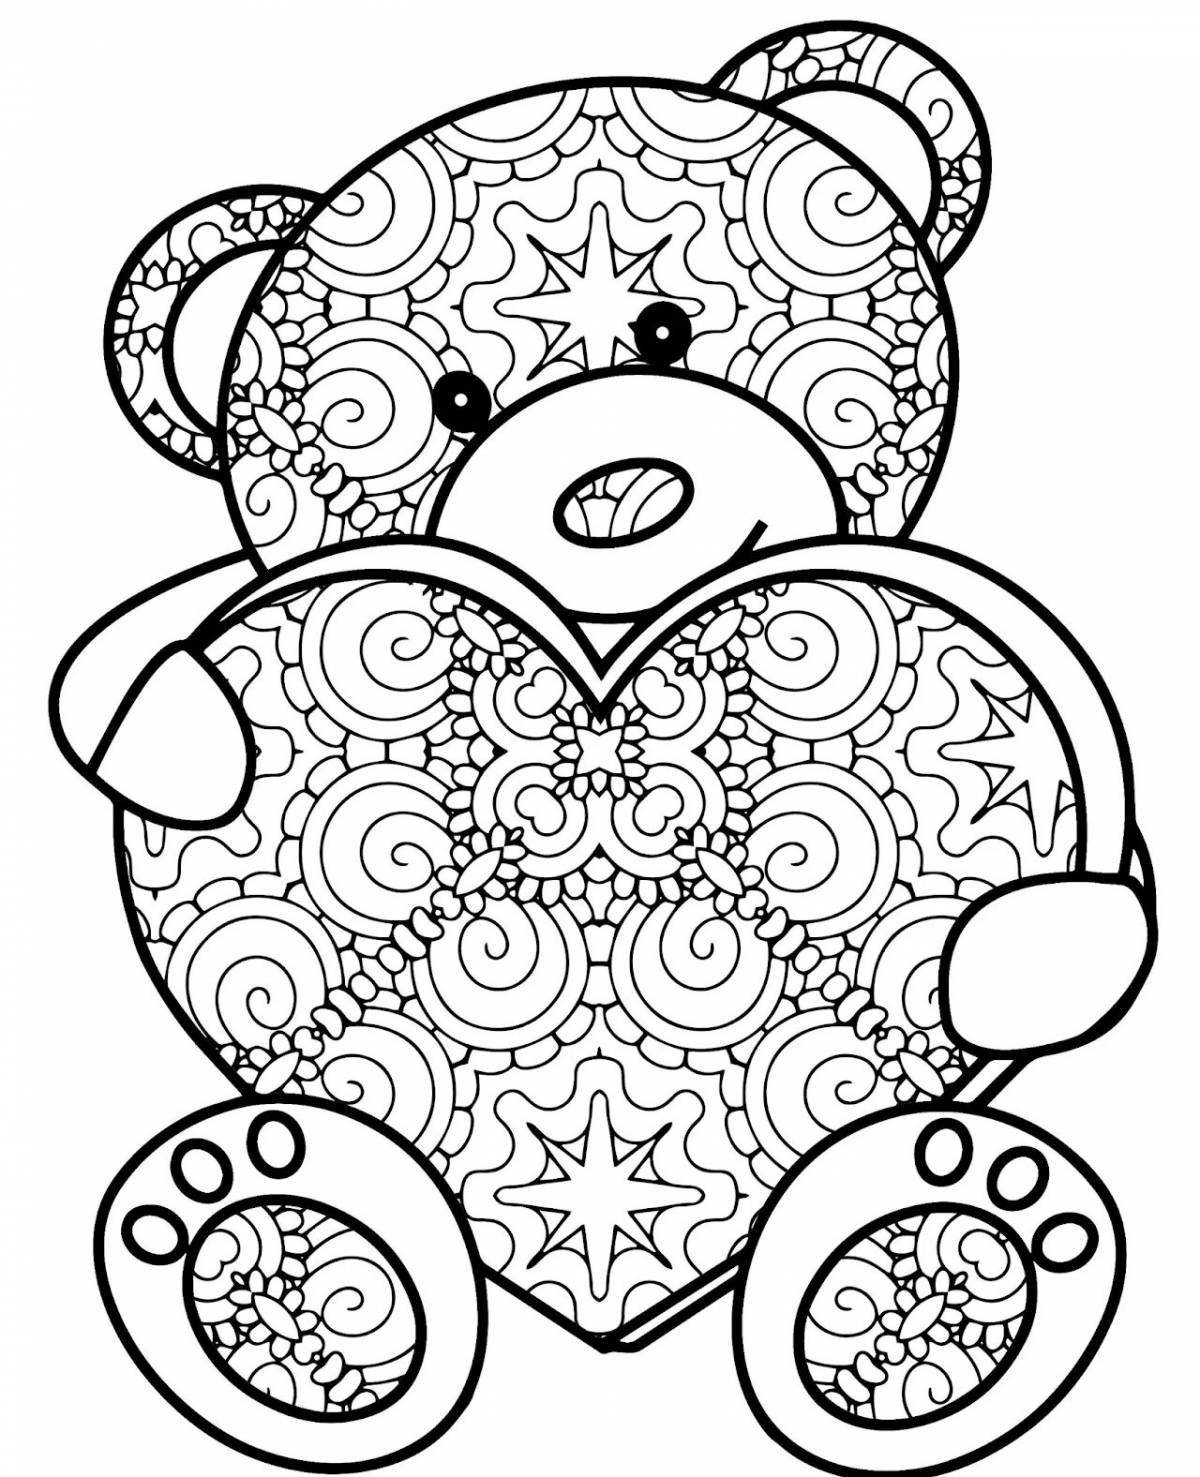 Painting adult lung coloring page